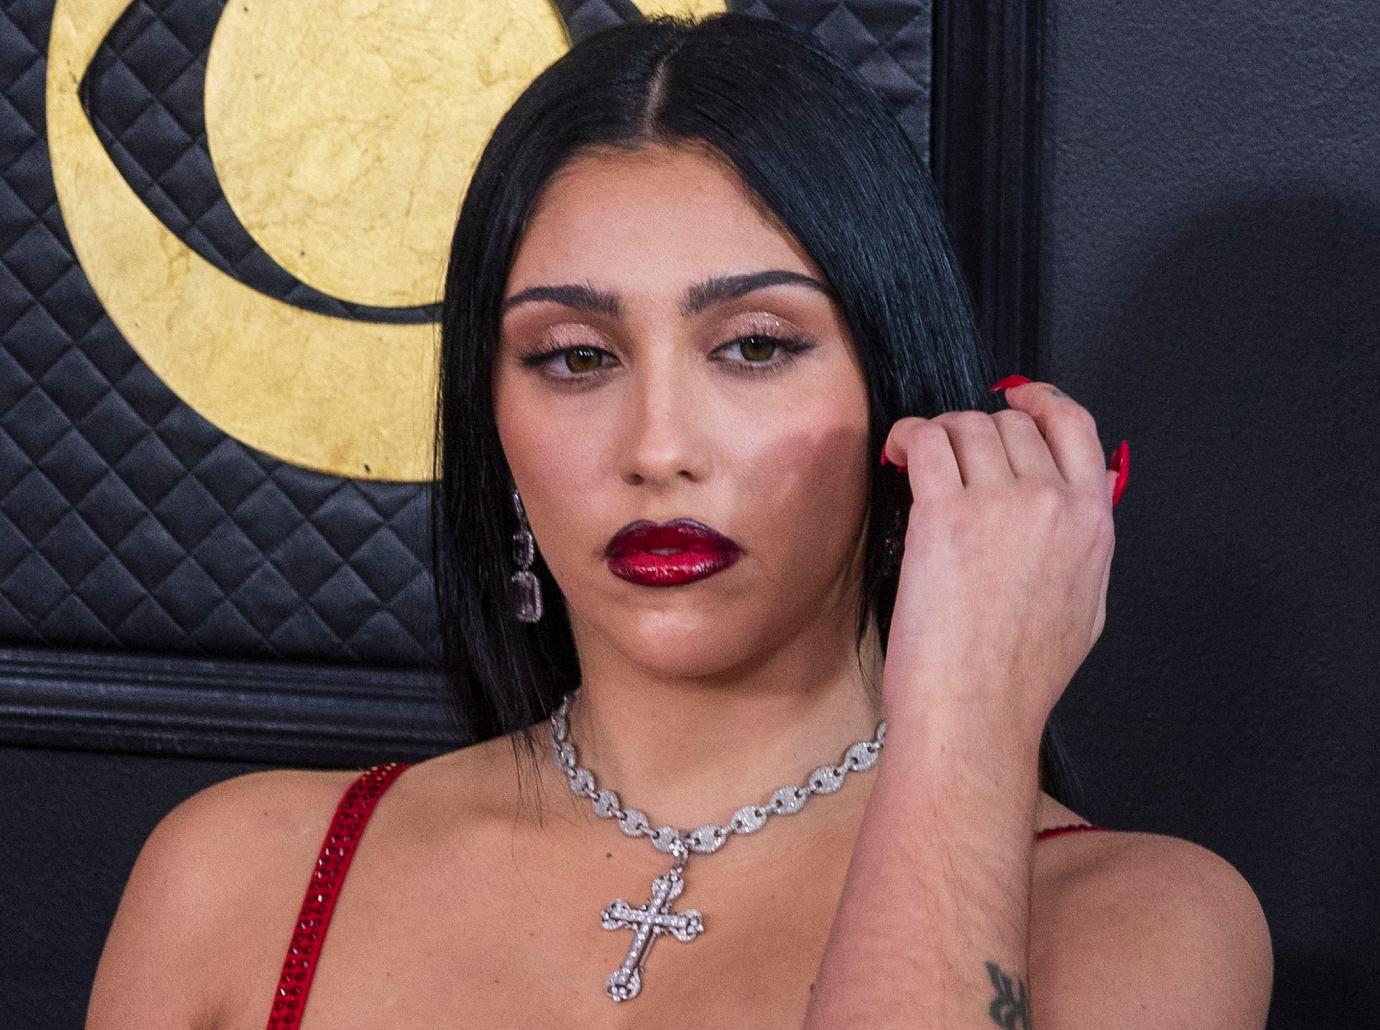 Madonna's daughter Lourdes, 24, poses for sultry snaps as she